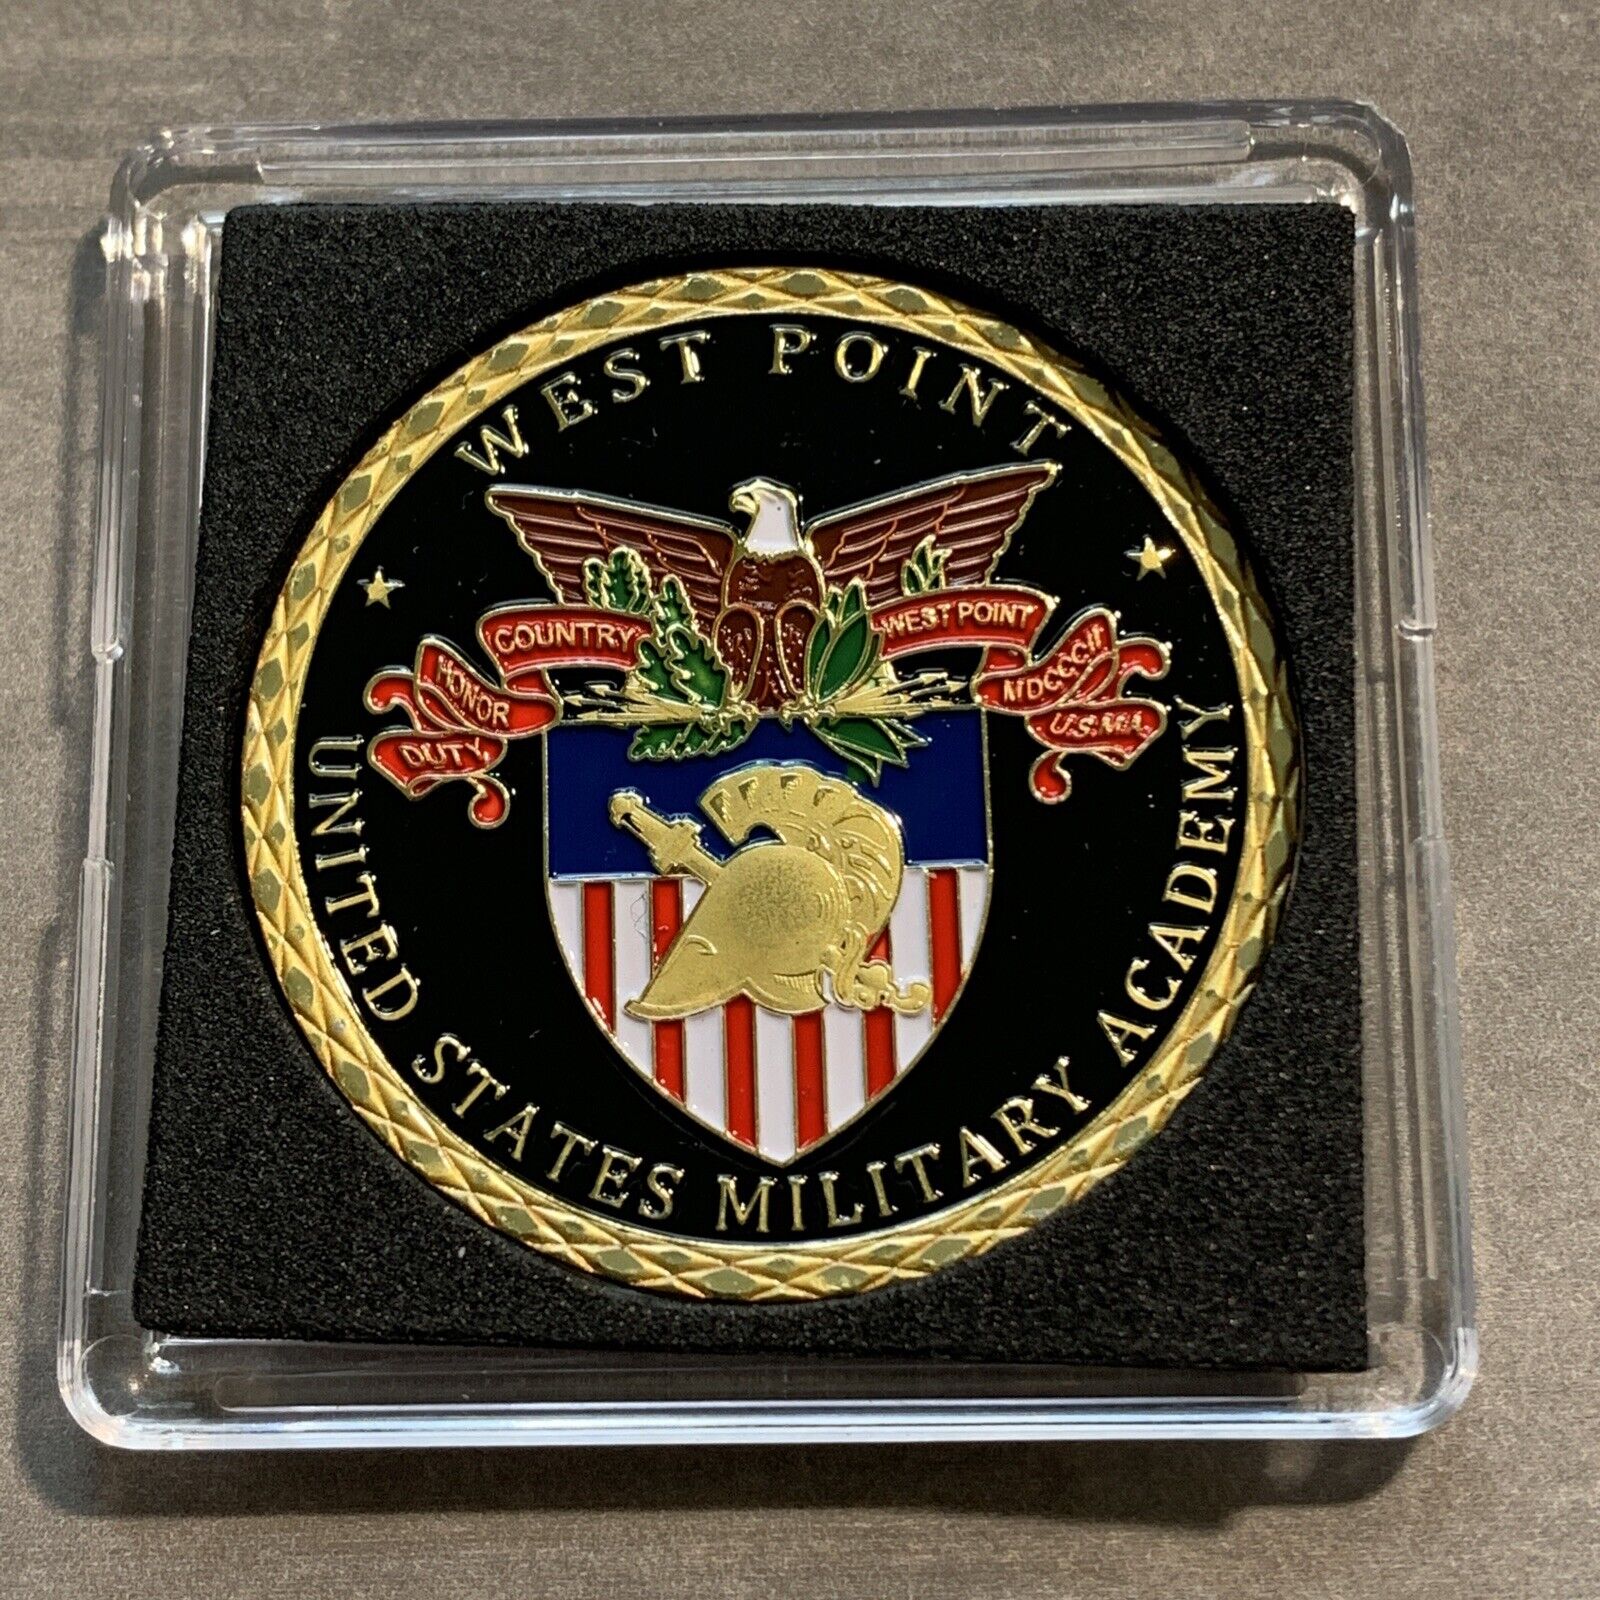 U.S. Army West Point Challenge Coin